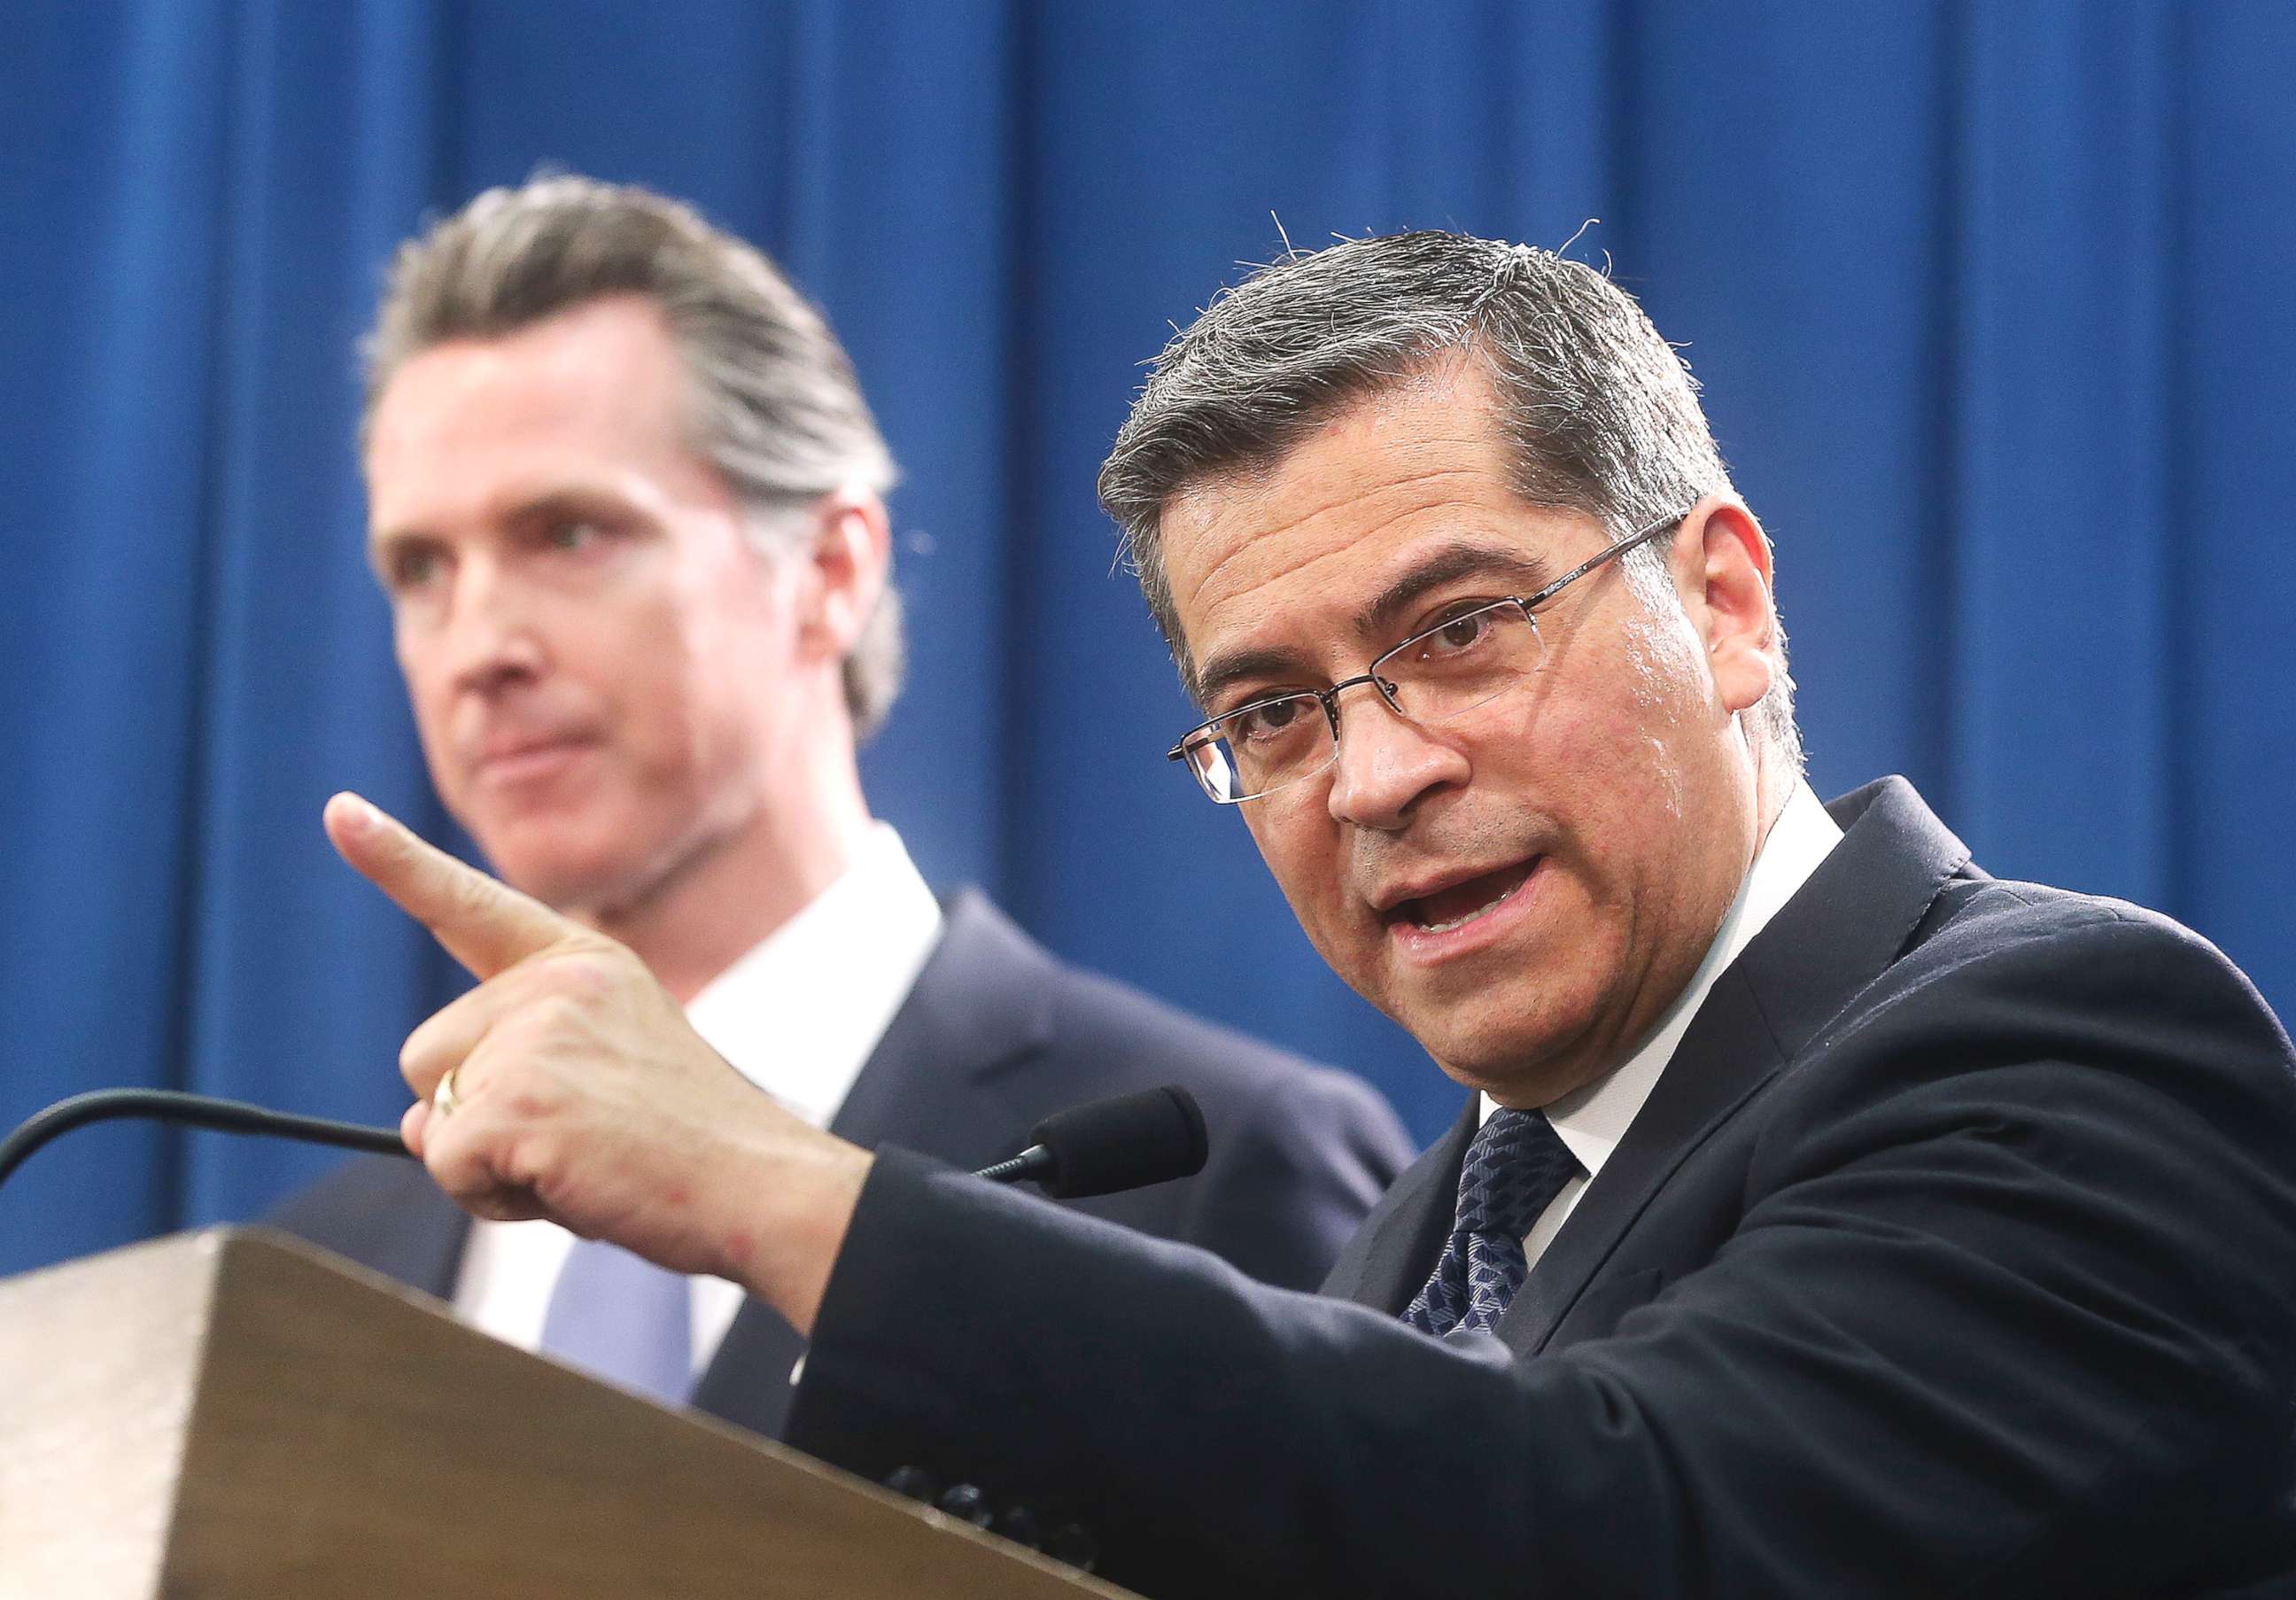 PHOTO: California Attorney General Xavier Becerra, right, said California will probably sue President Donald Trump over his emergency declaration to fund a wall on the U.S.-Mexico border in Sacramento, Calif. Feb. 15, 2019.